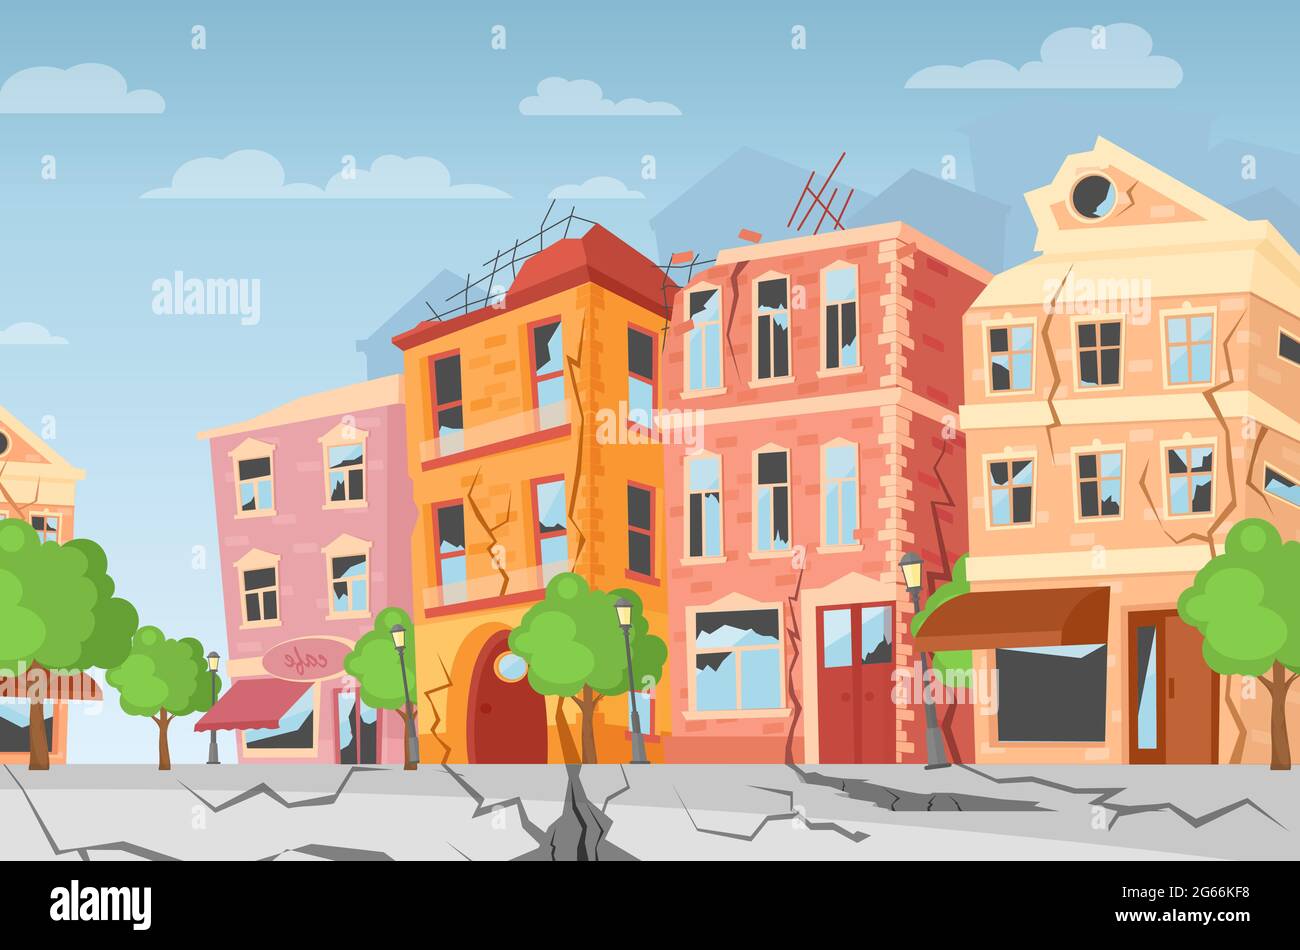 Vector illustration of earthquake in the city, ground crevices. Cartoon colorful houses with cracks and damages. Natural disaster concept, cataclysm Stock Vector